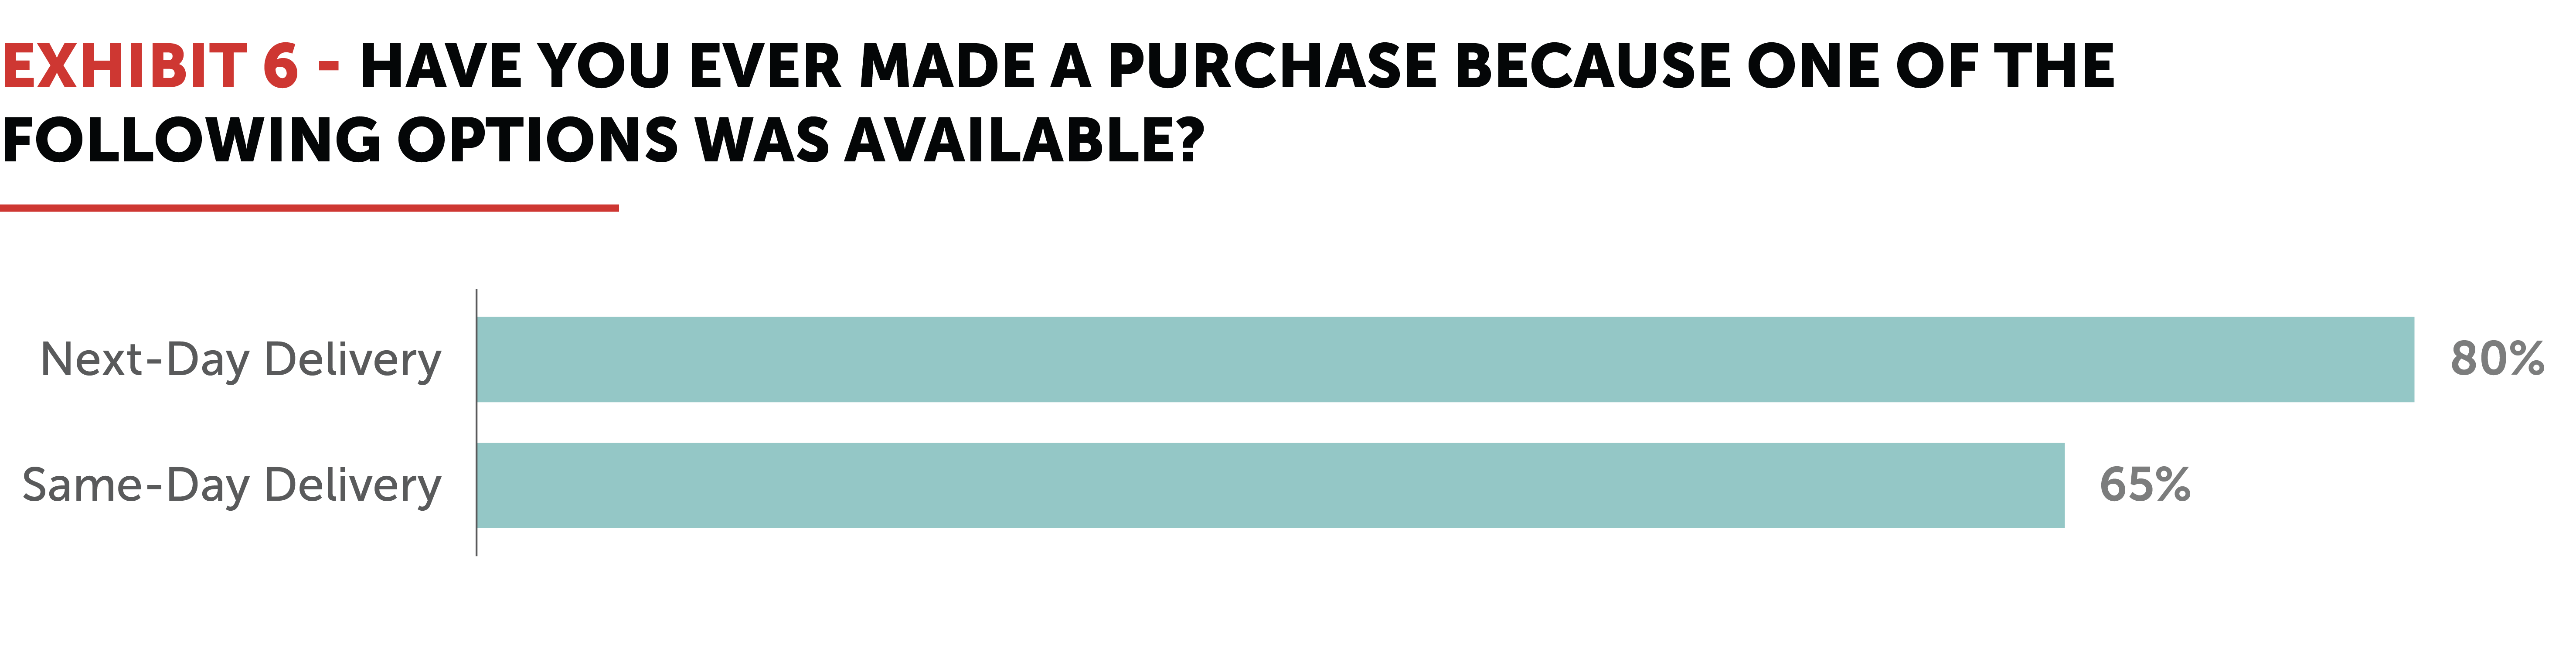 Exhibit 6 – Have you ever made a purchase because one of the following options was available?